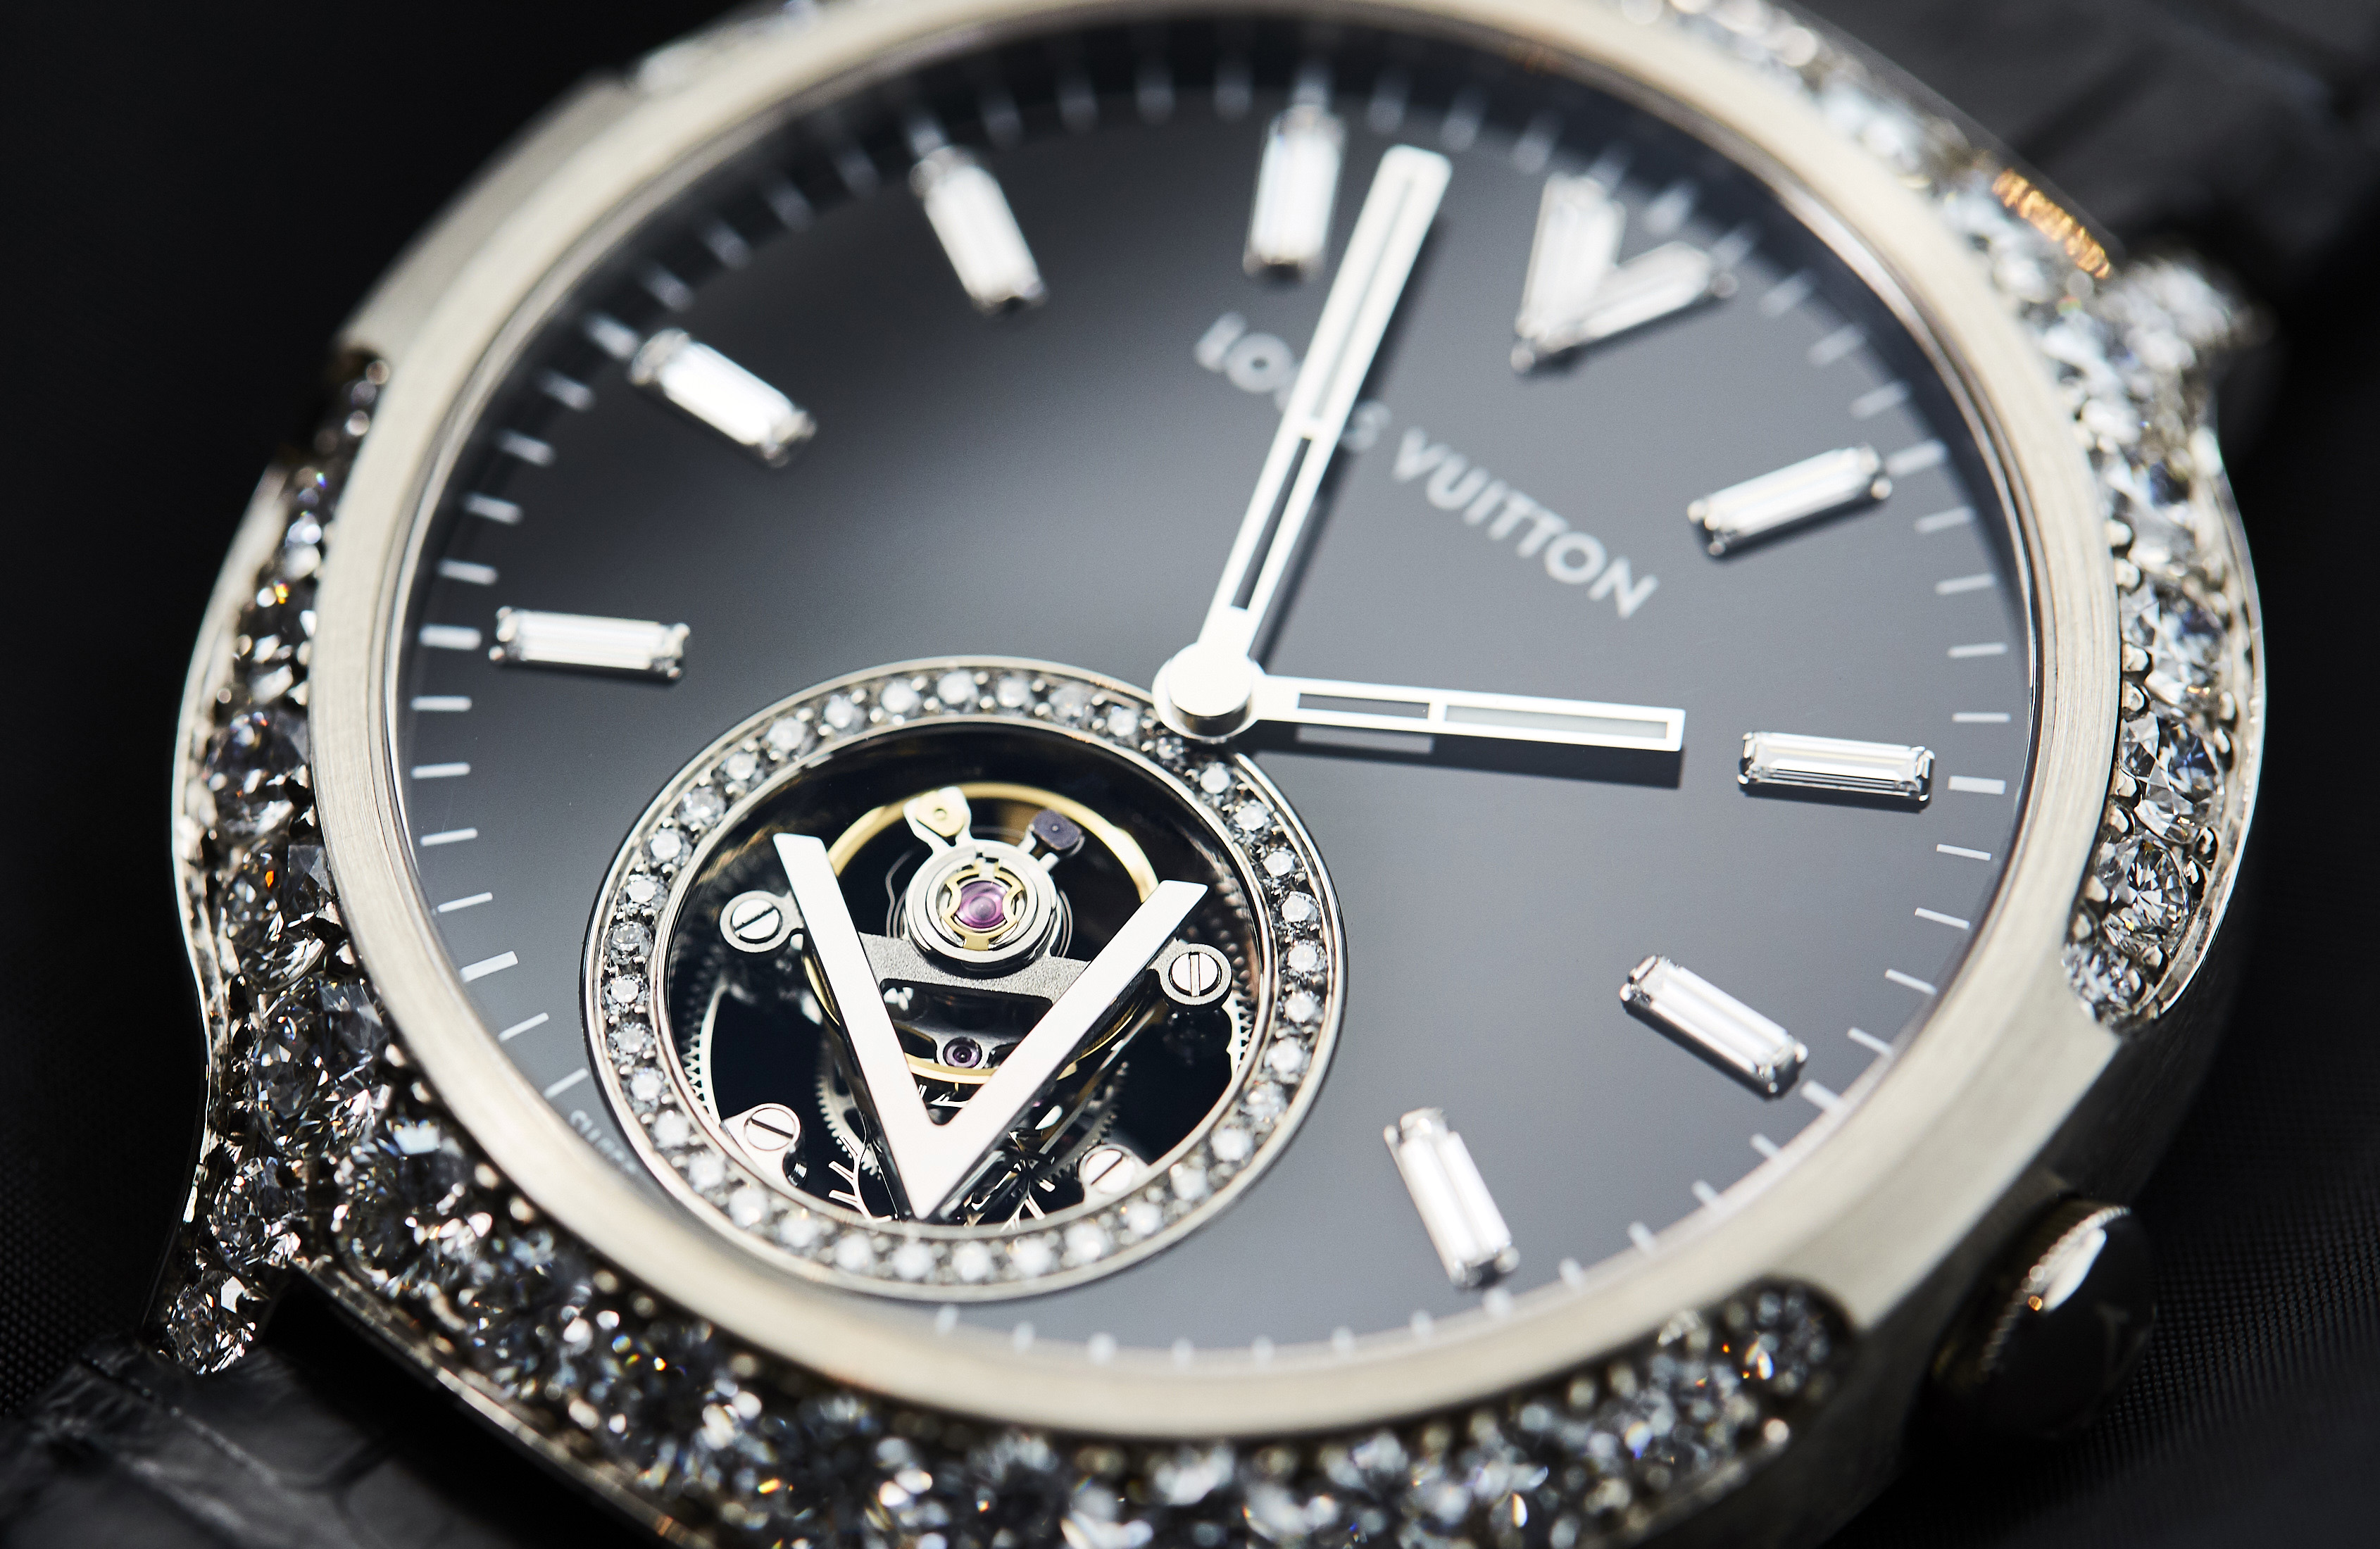 Louis Vuitton 2019 watch collection review